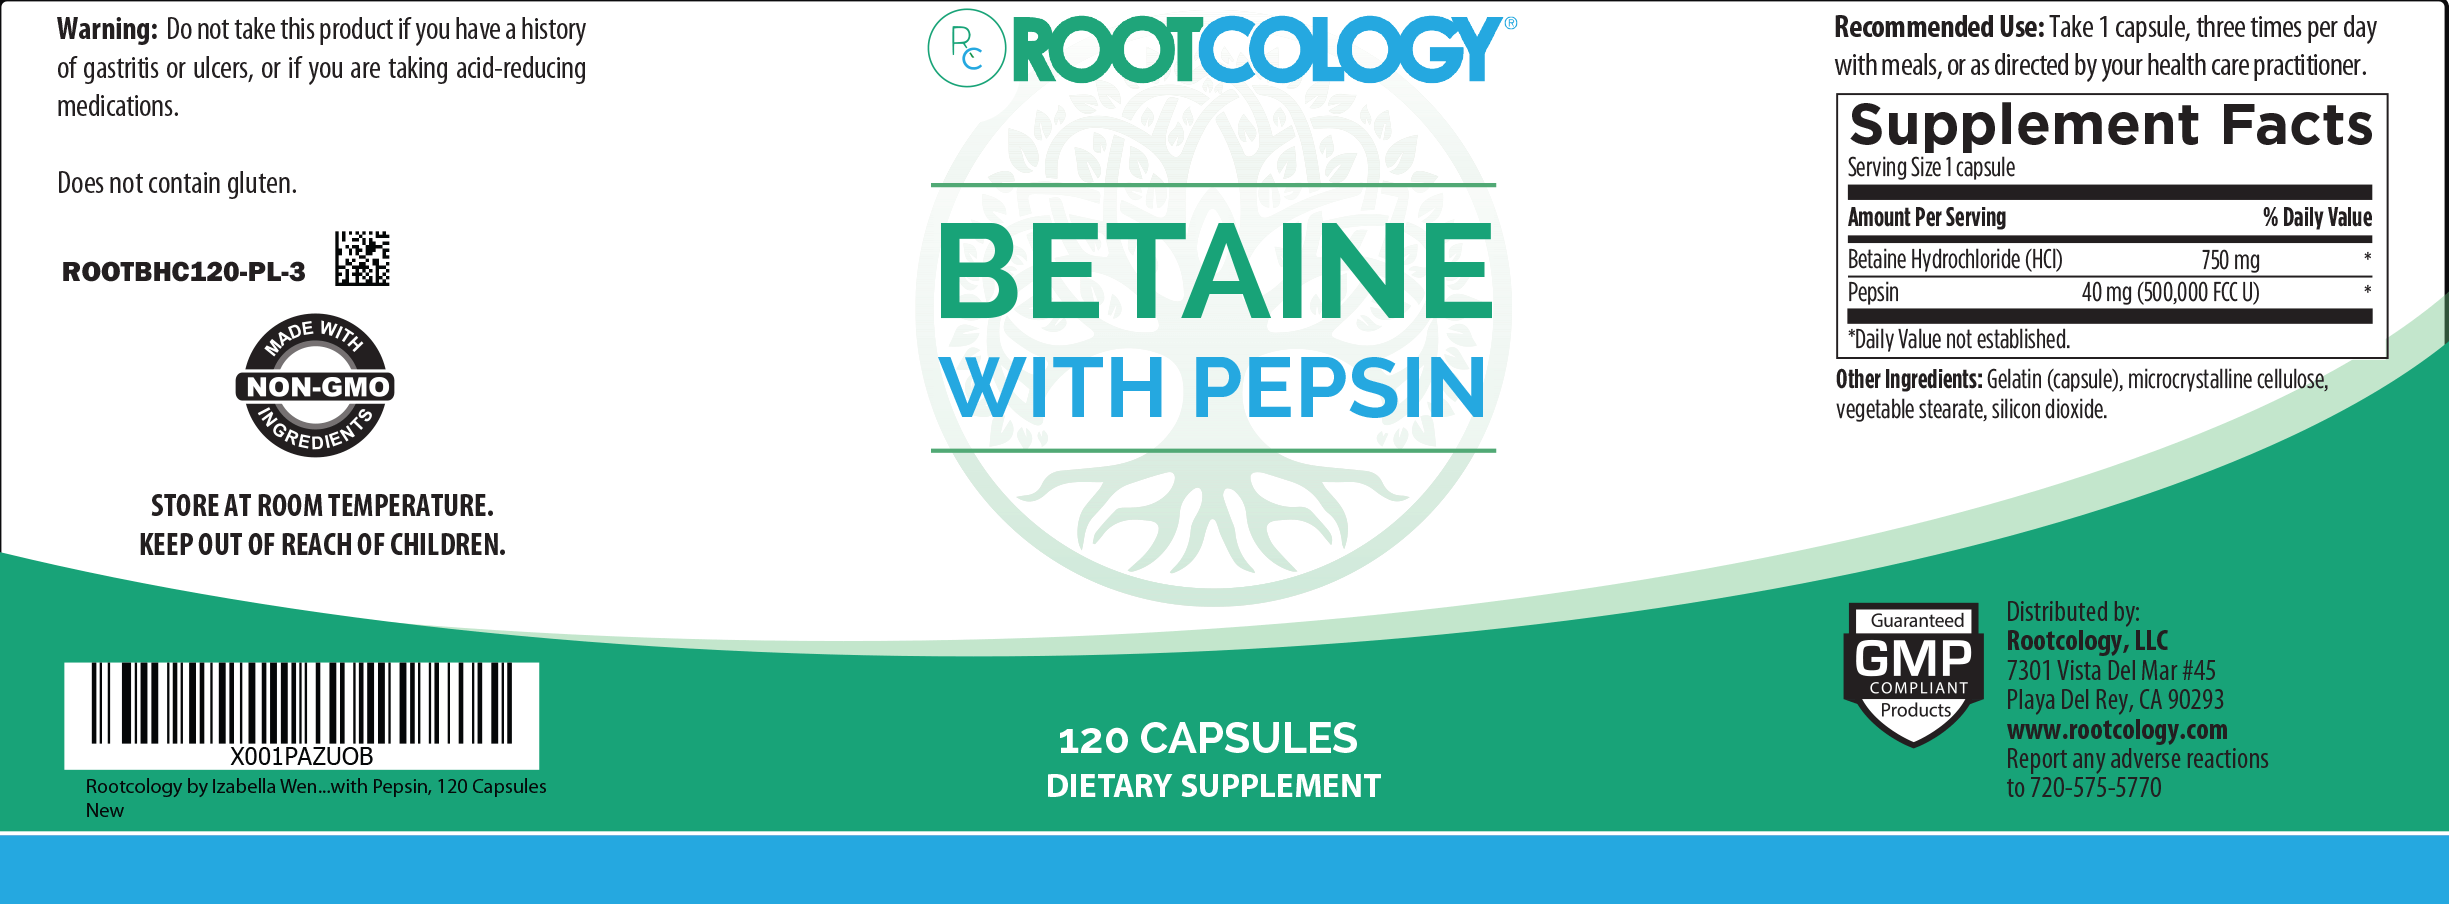 Rootcology Betaine with Pepsin Supplement Label